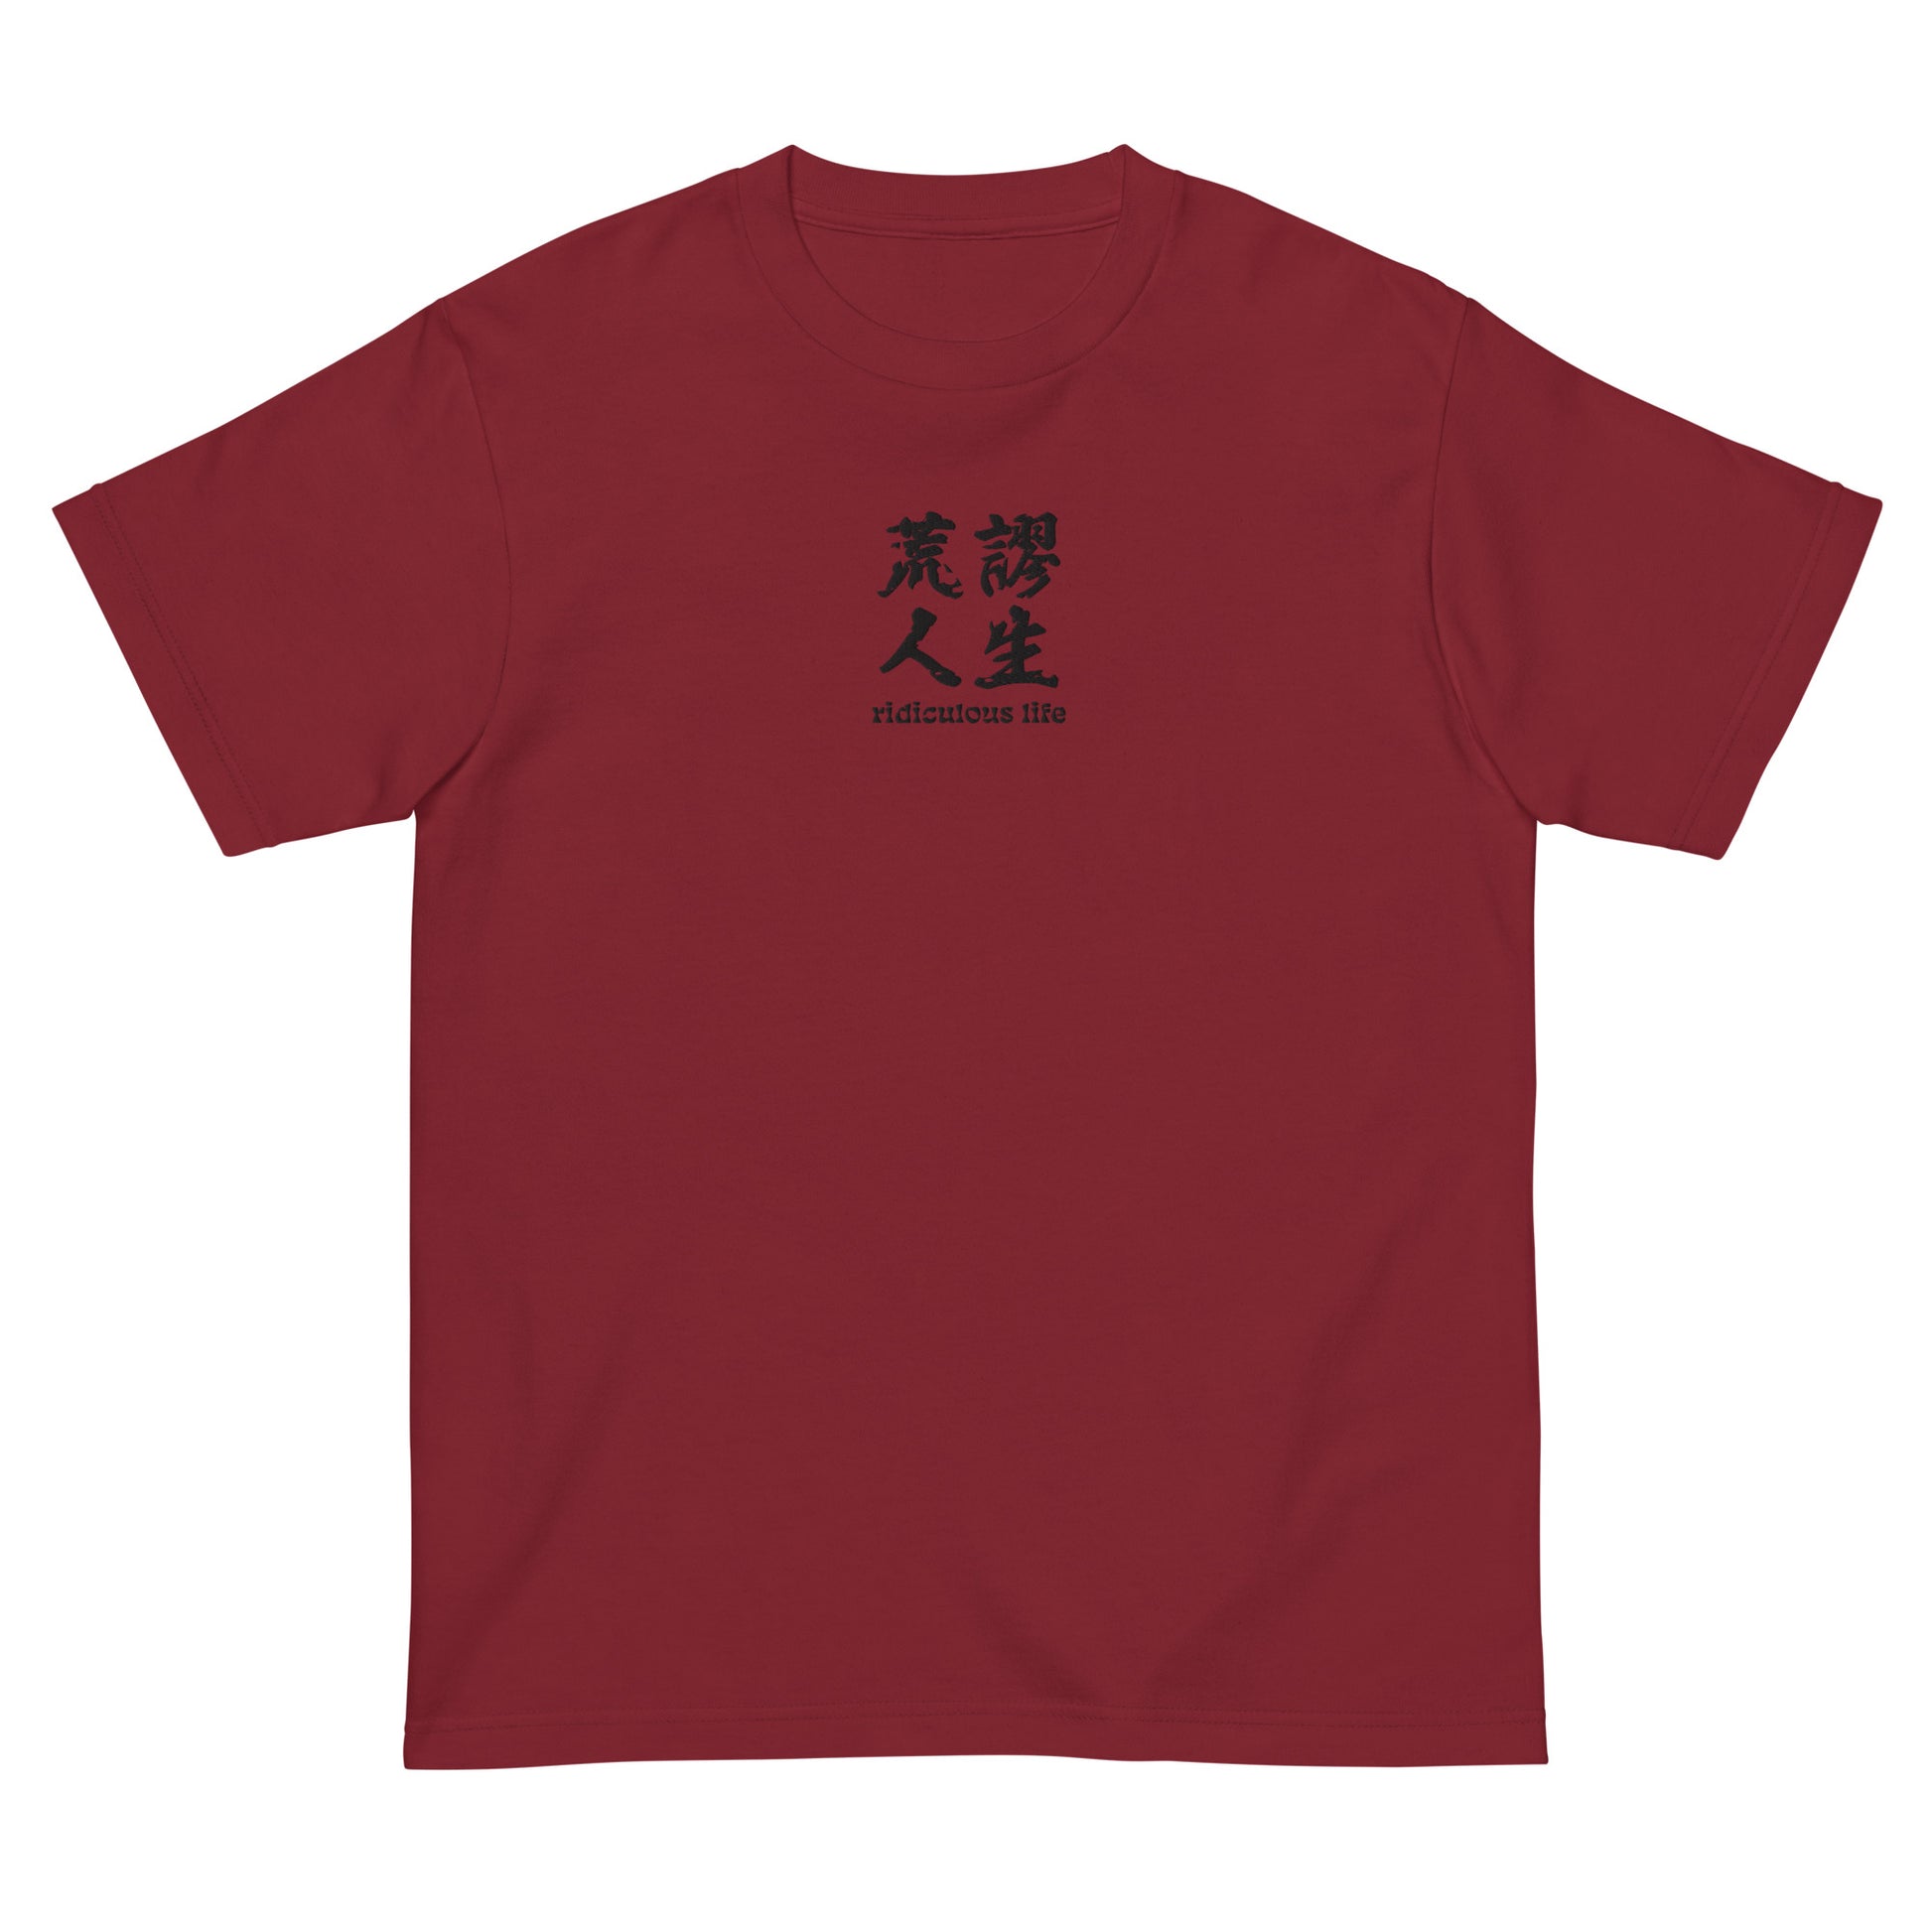 Red High Quality Tee - Front Design with an Black Embroidery "Ridiculous Life" in Chinese and English 